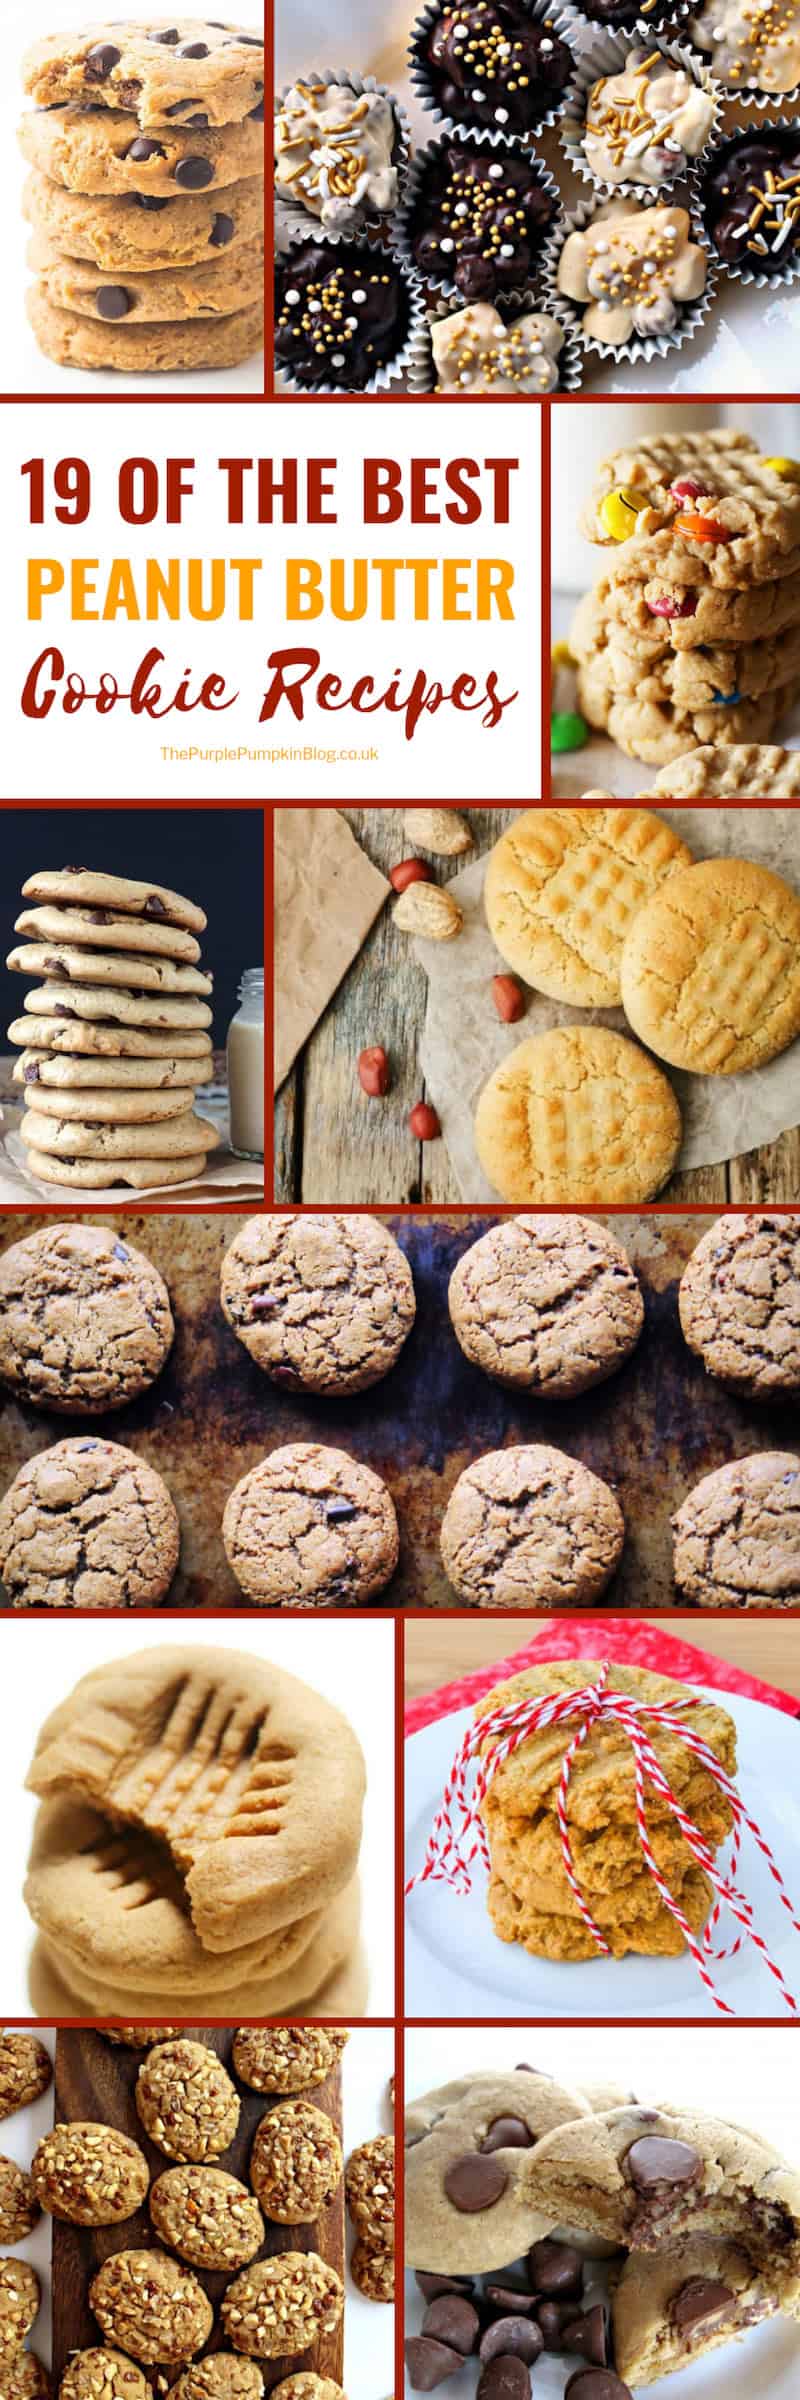 There is no denying that peanut butter is awesome, but put it into cookies and that is a match made in heaven! Here are 19 of the Best Peanut Butter Cookie Recipes, which include low carb, keto and no-bake peanut butter cookies; as well as recipes including oatmeal, chocolate, and toffee - yummy! #PeanutButterCookies #PeanutButterCookieRecipes